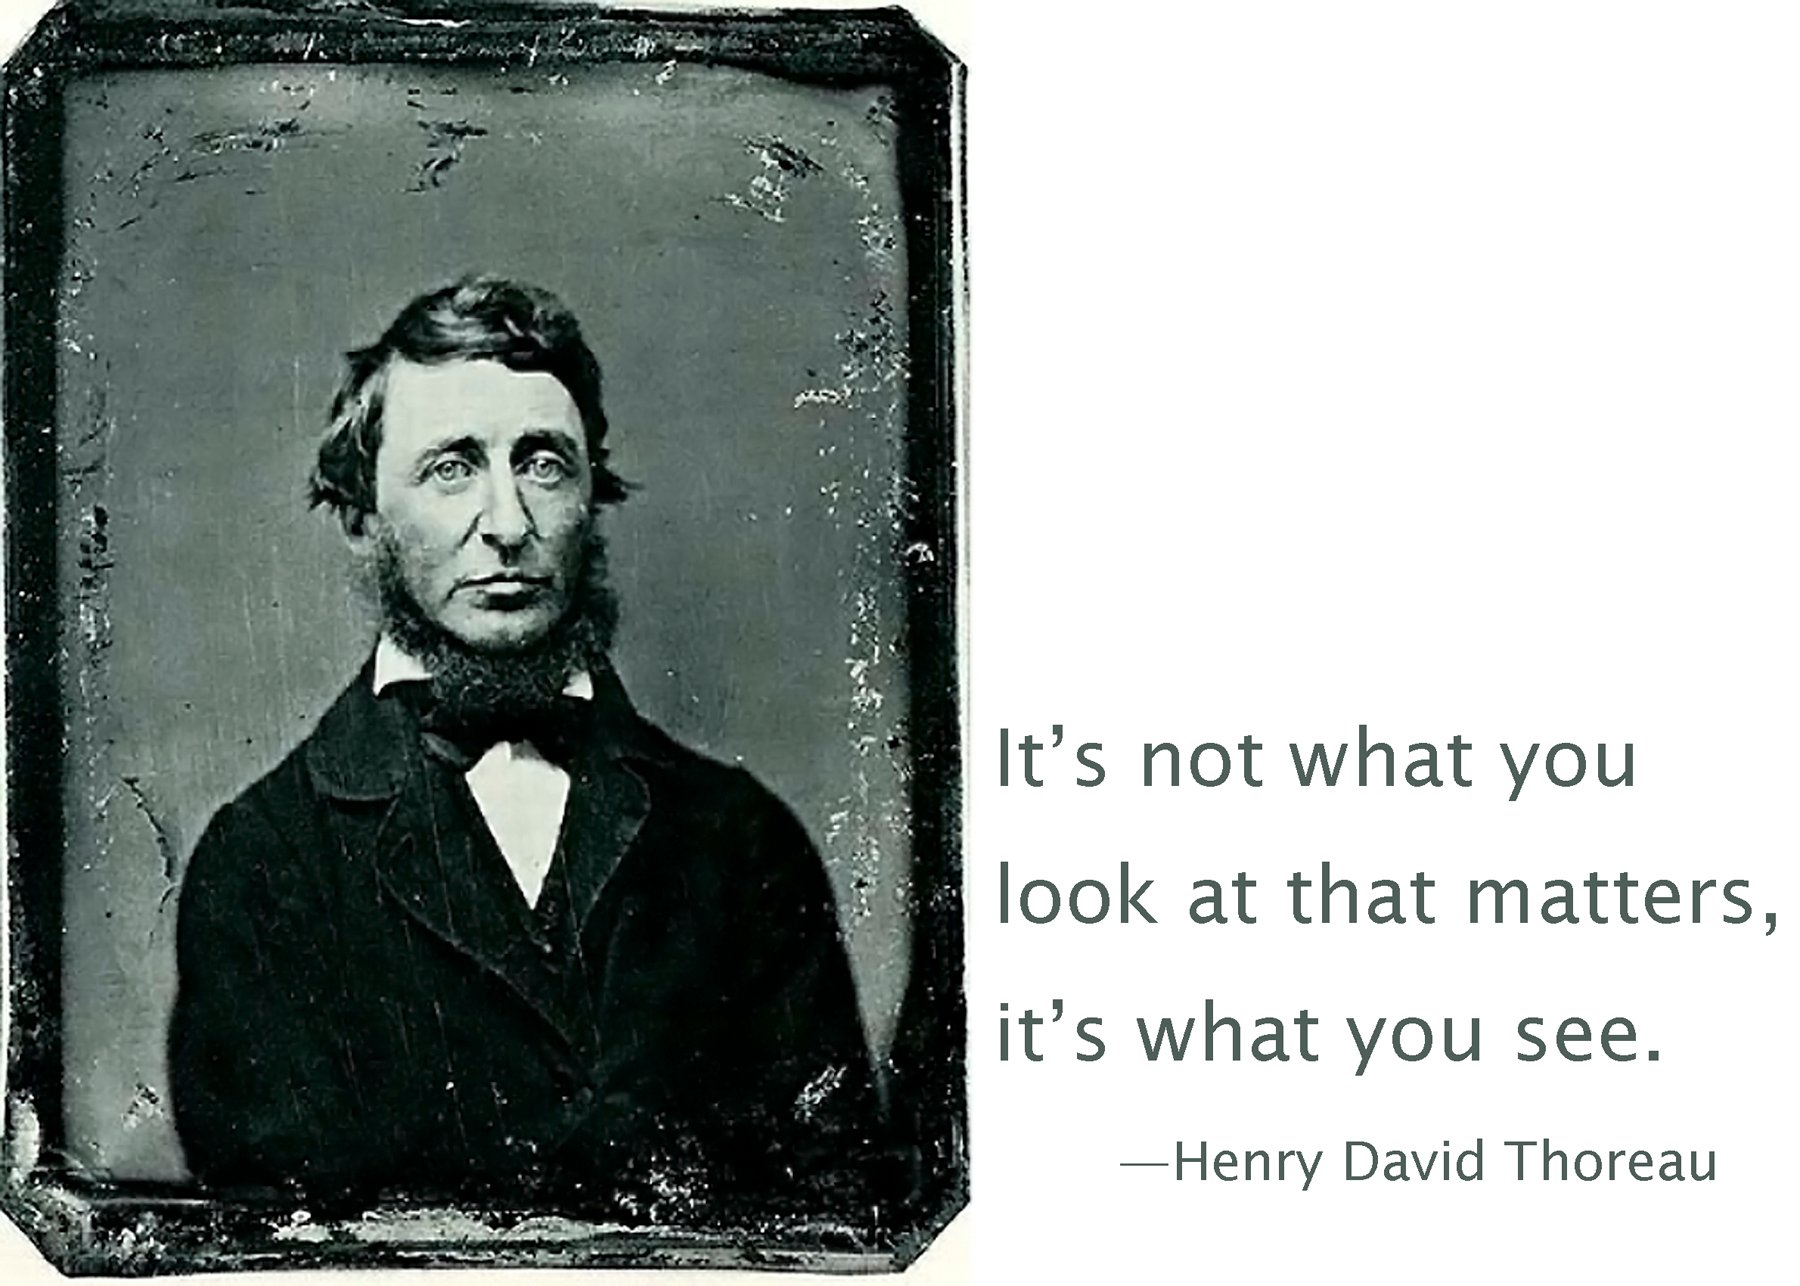 A biography of henry david thoreau and the importance of his works